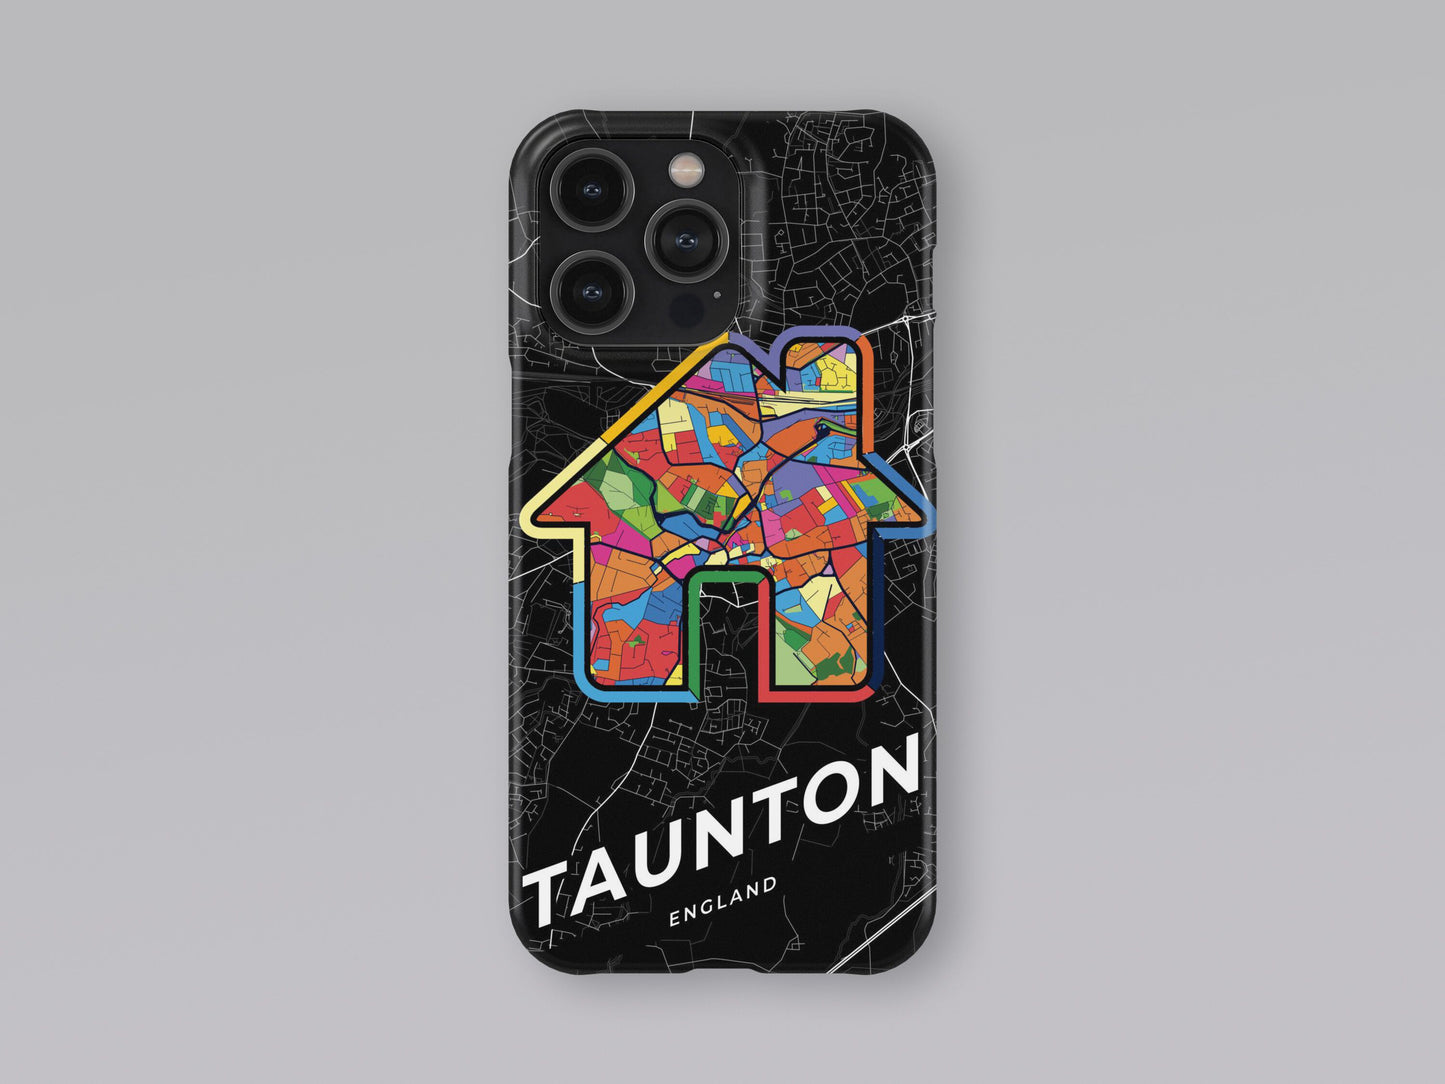 Taunton England slim phone case with colorful icon 3